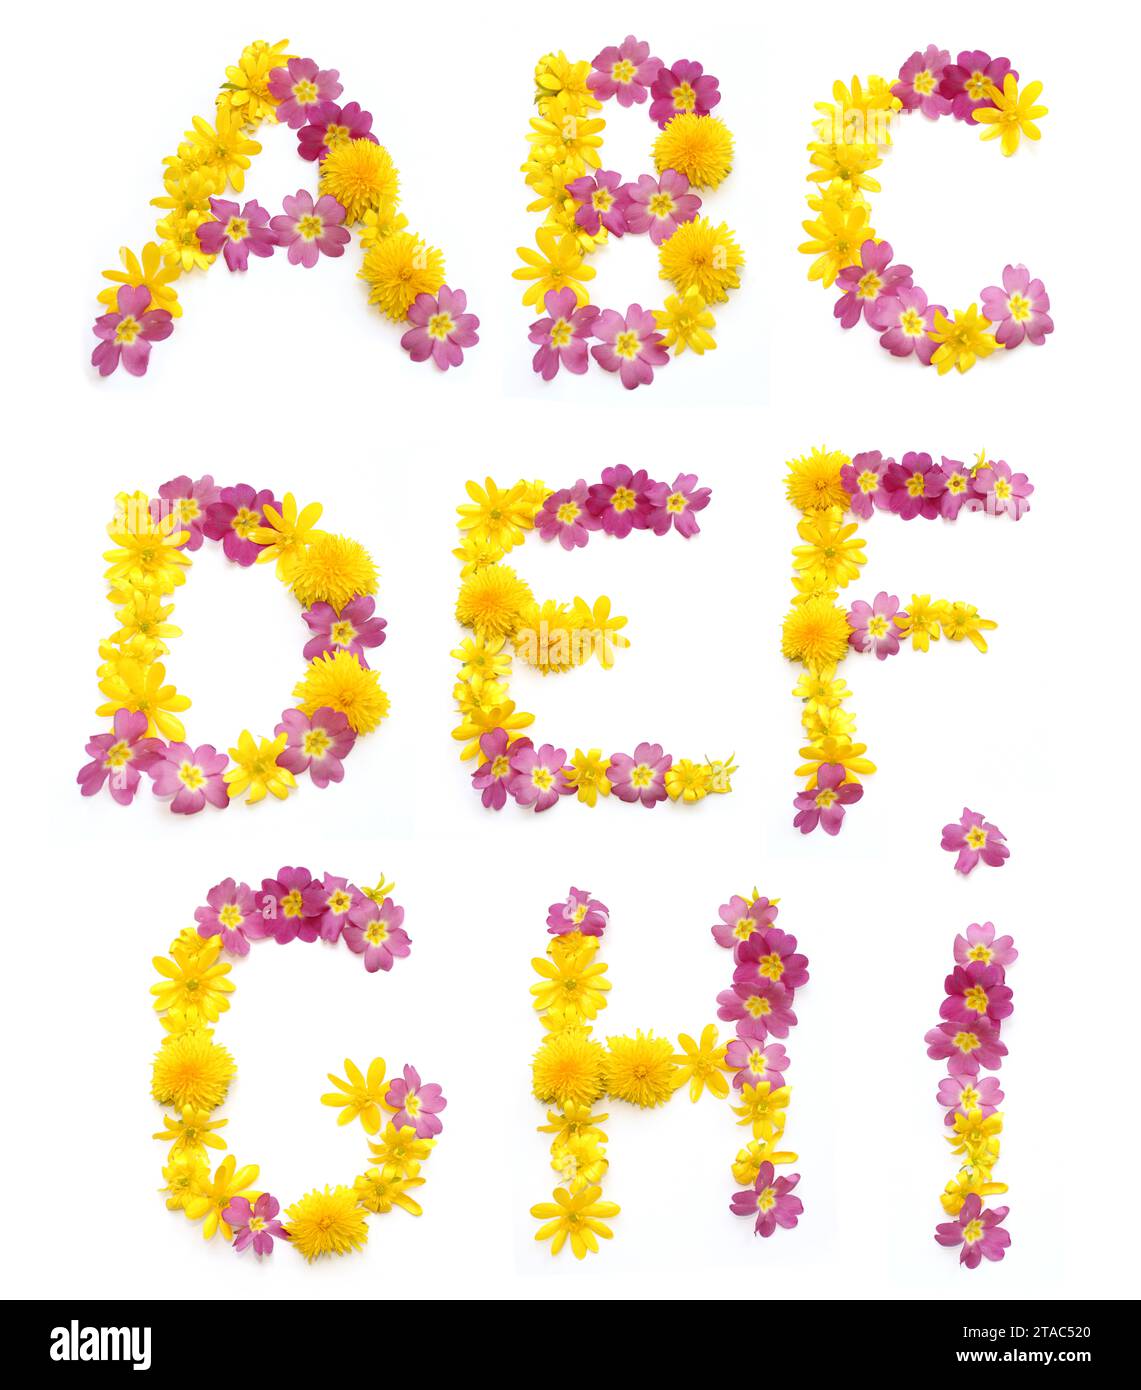 set of letters A B C D E F G I made of yellow, pink flowers. The floral lettering can be used as posters for weddings, anniversaries, corporate events Stock Photo